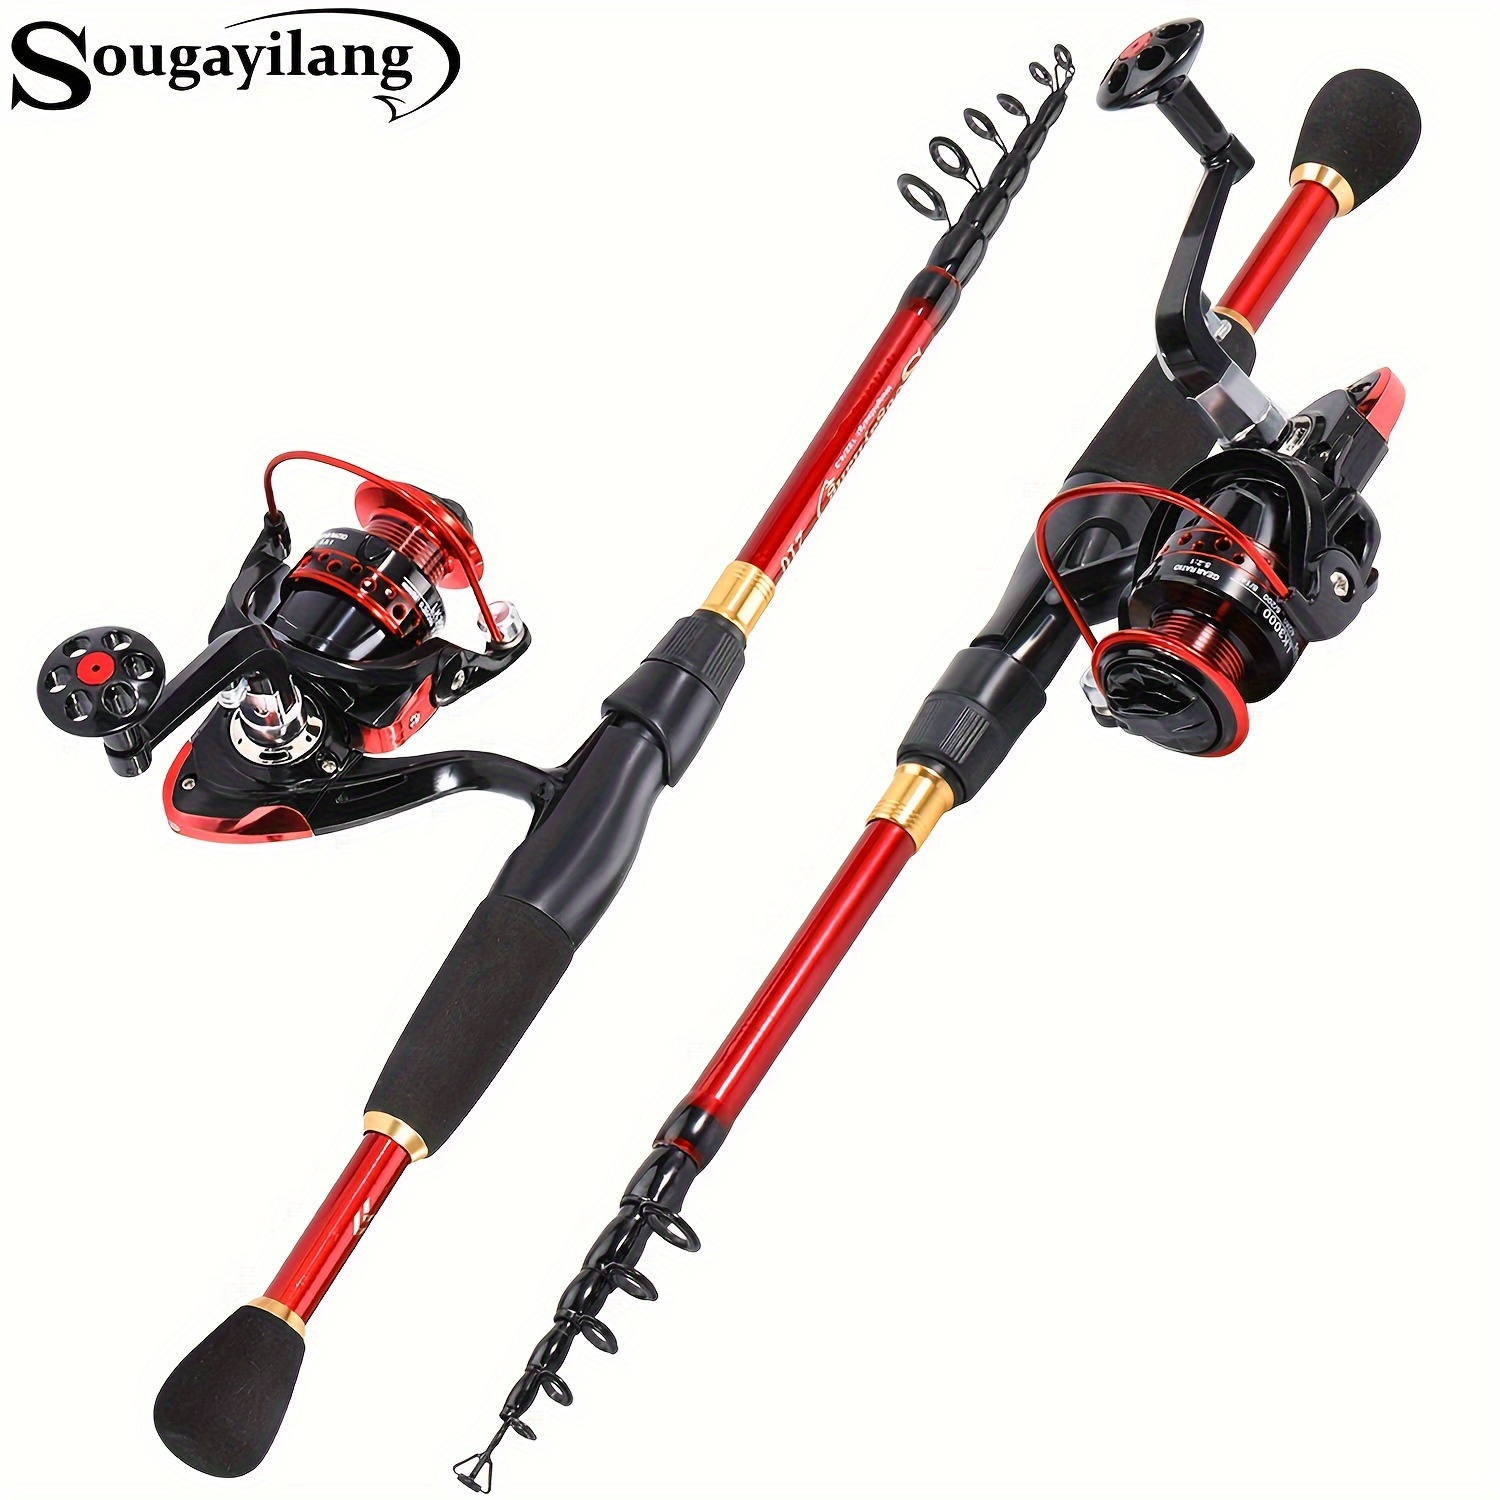 Sougayilang Resolute Fishing Rods, Spinning Rods & Casting Rods